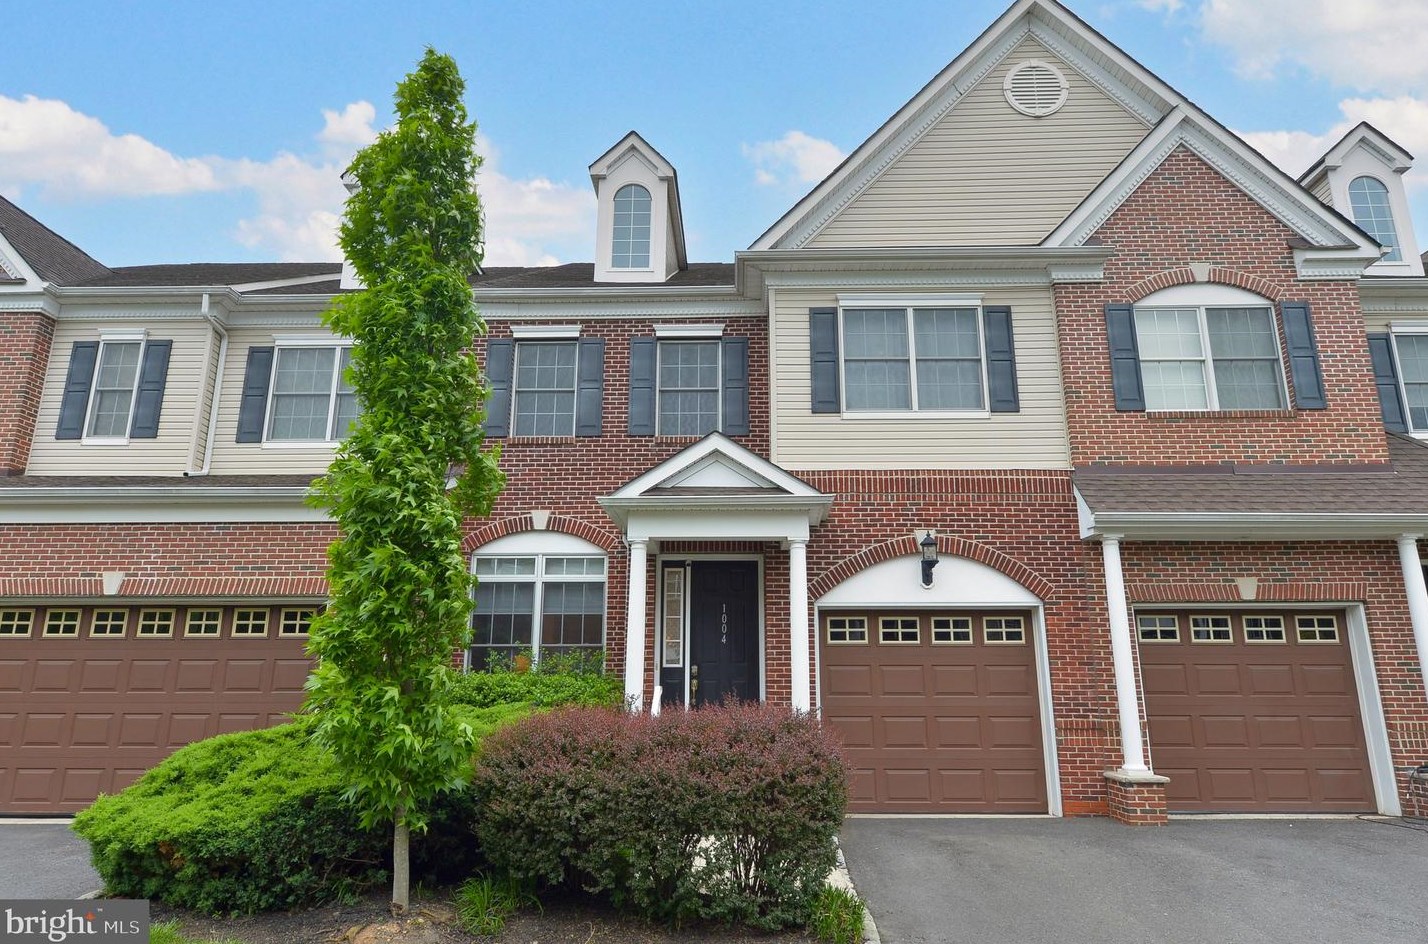 1004 Pacer Ct, Cherry Hill, NJ 08002